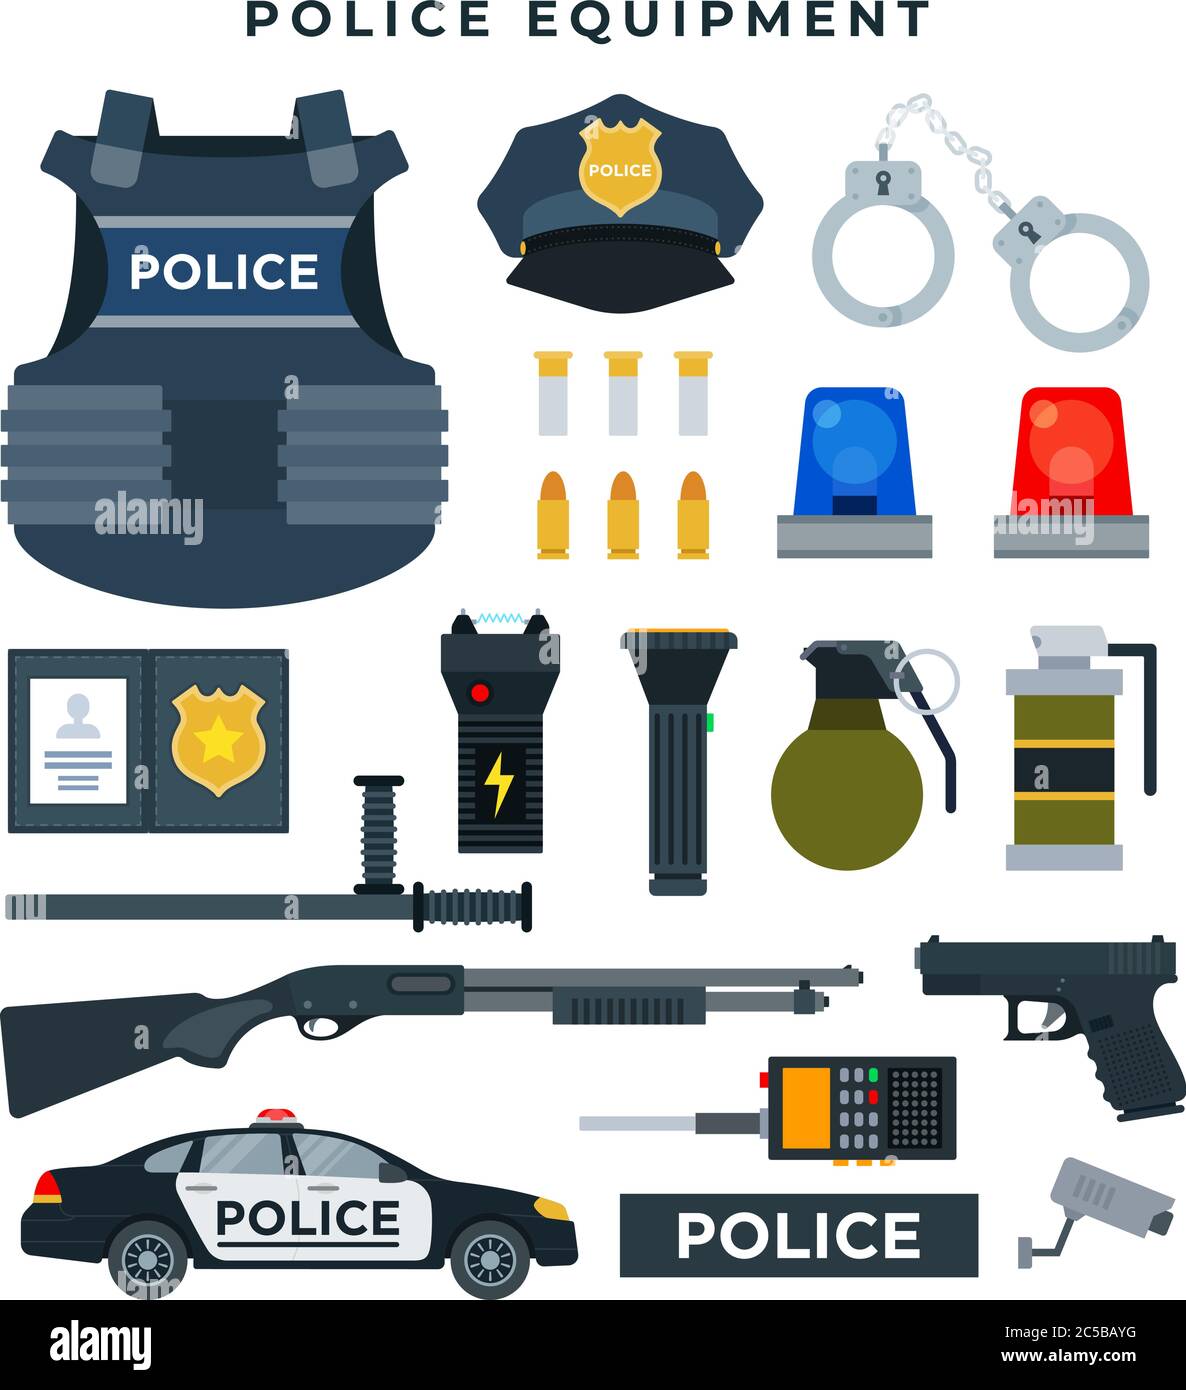 Police professional equipment, set. Body armor, police badge, weapon, bullets, handcuffs, flashlight, portable radio, police car and other elements Stock Vector